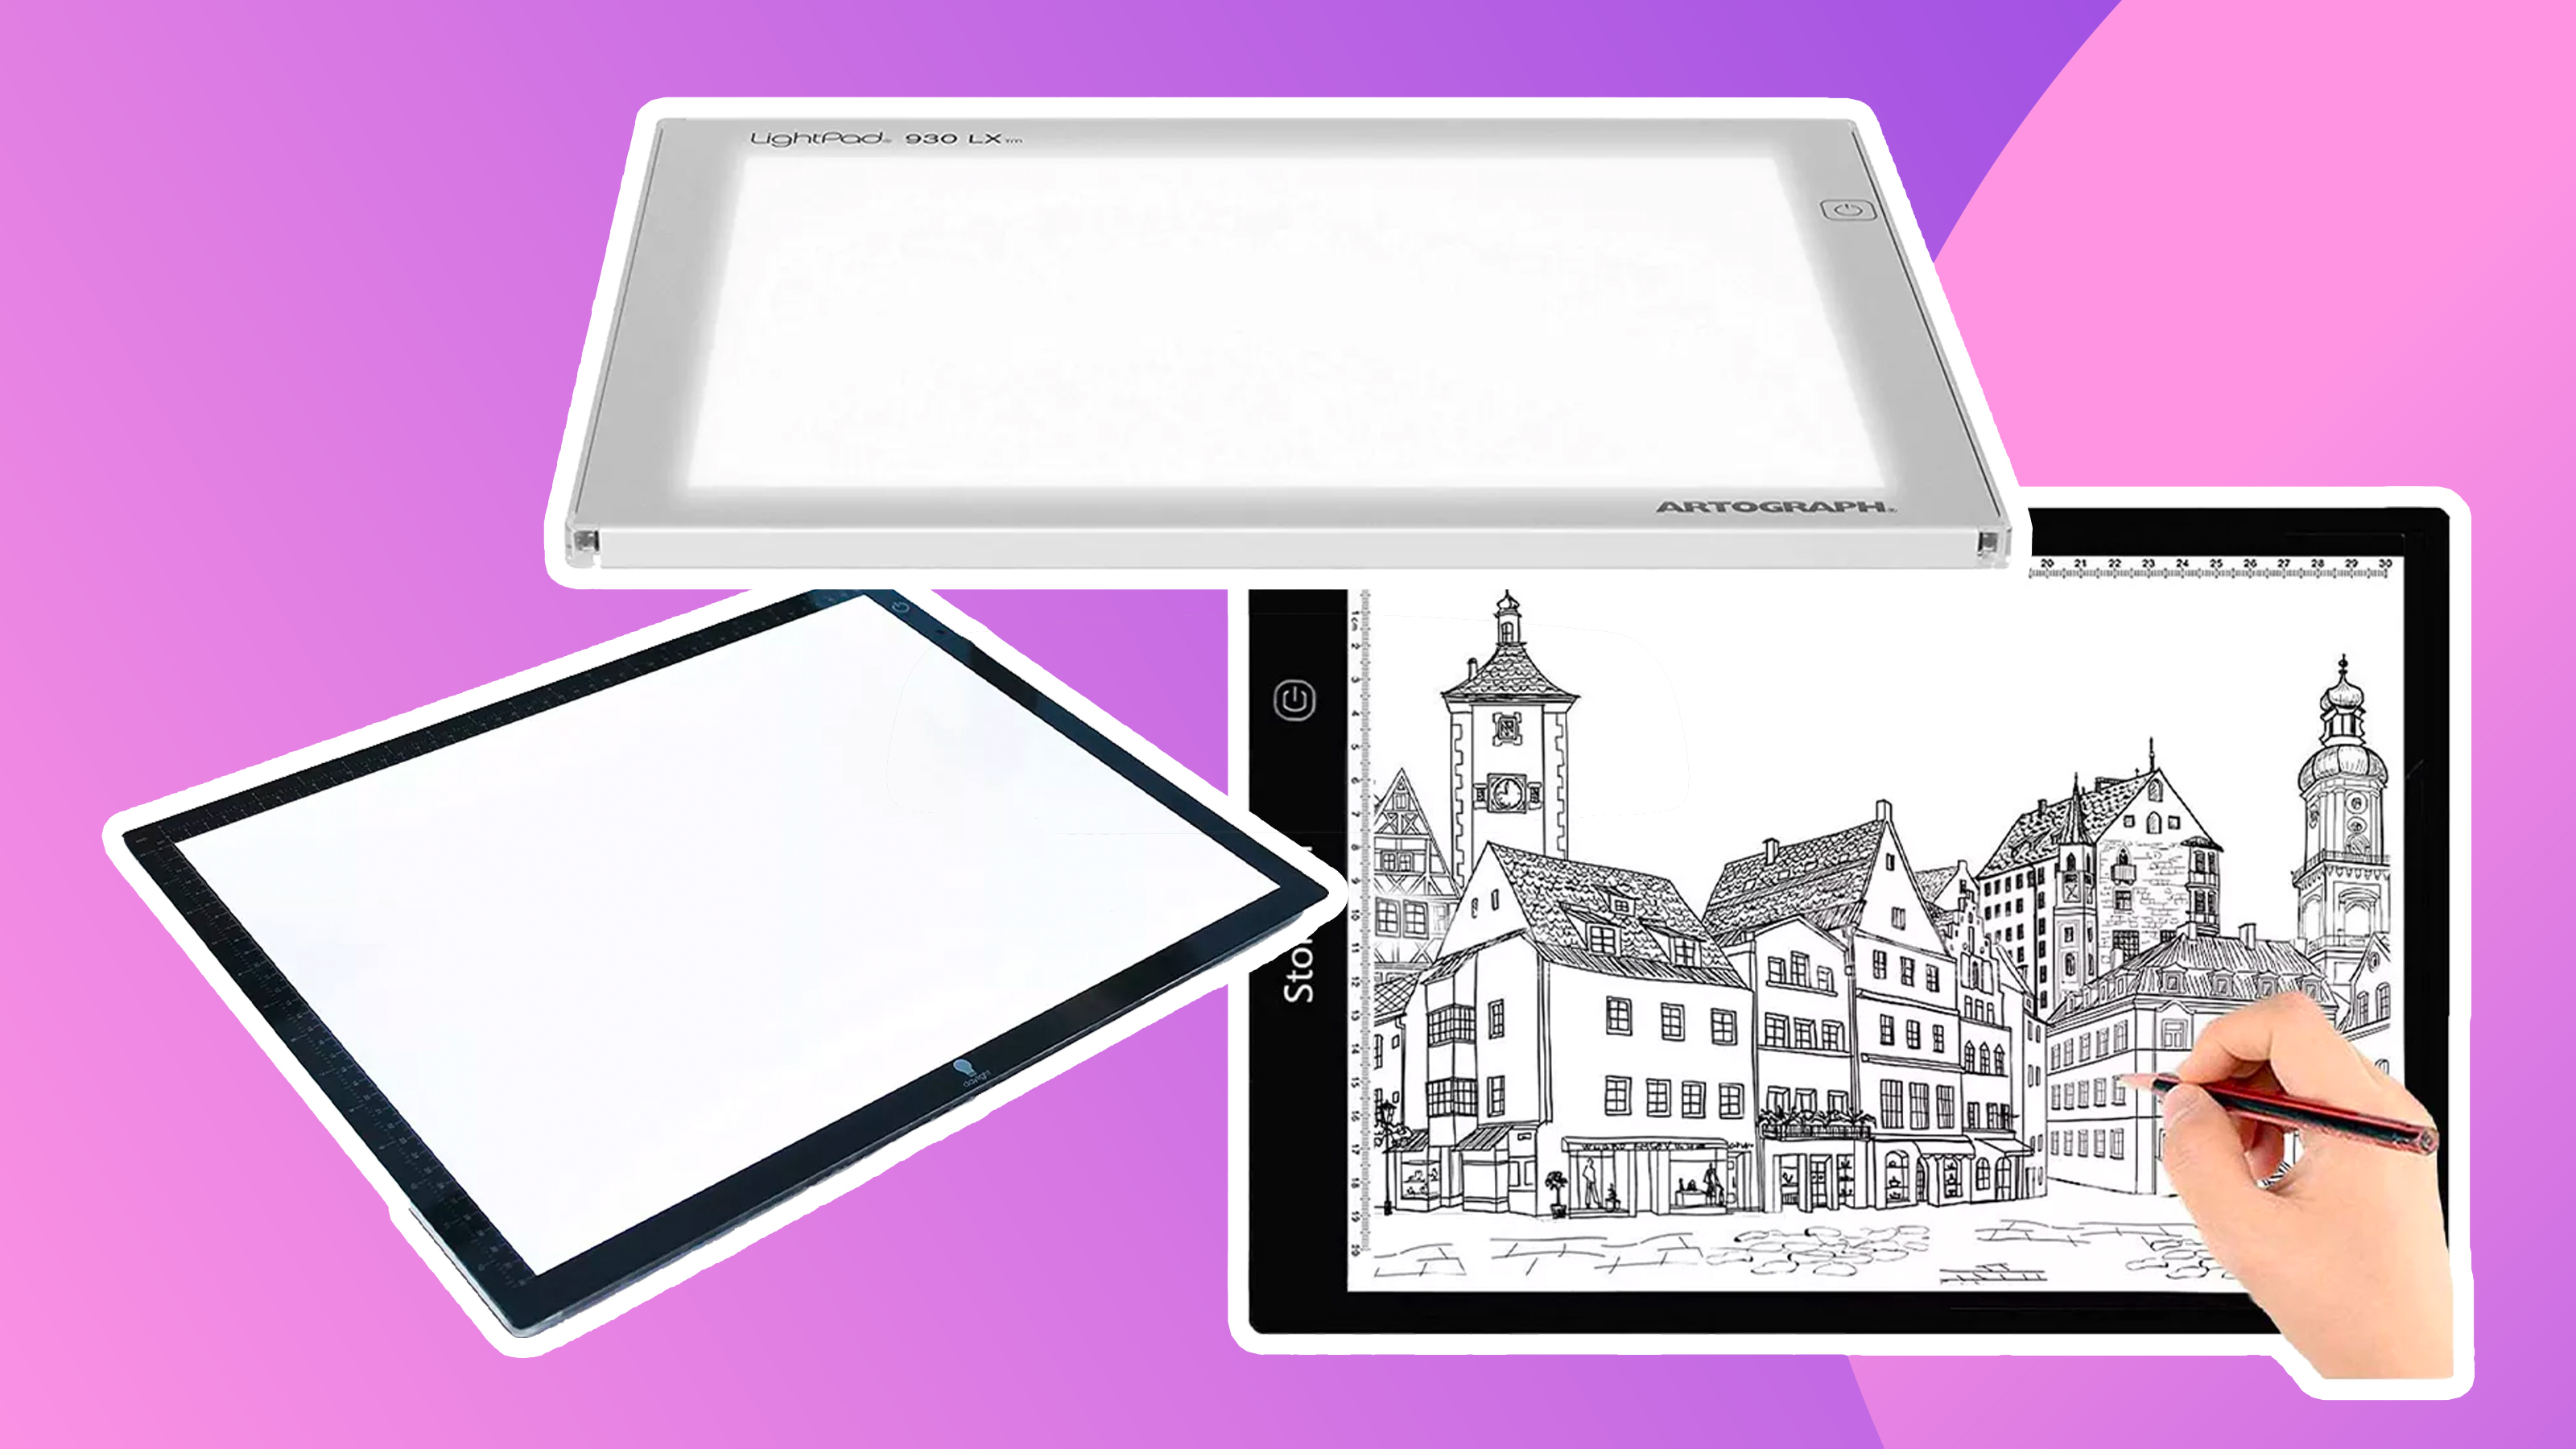 Huion A4 portable LED Light Tracing Pad